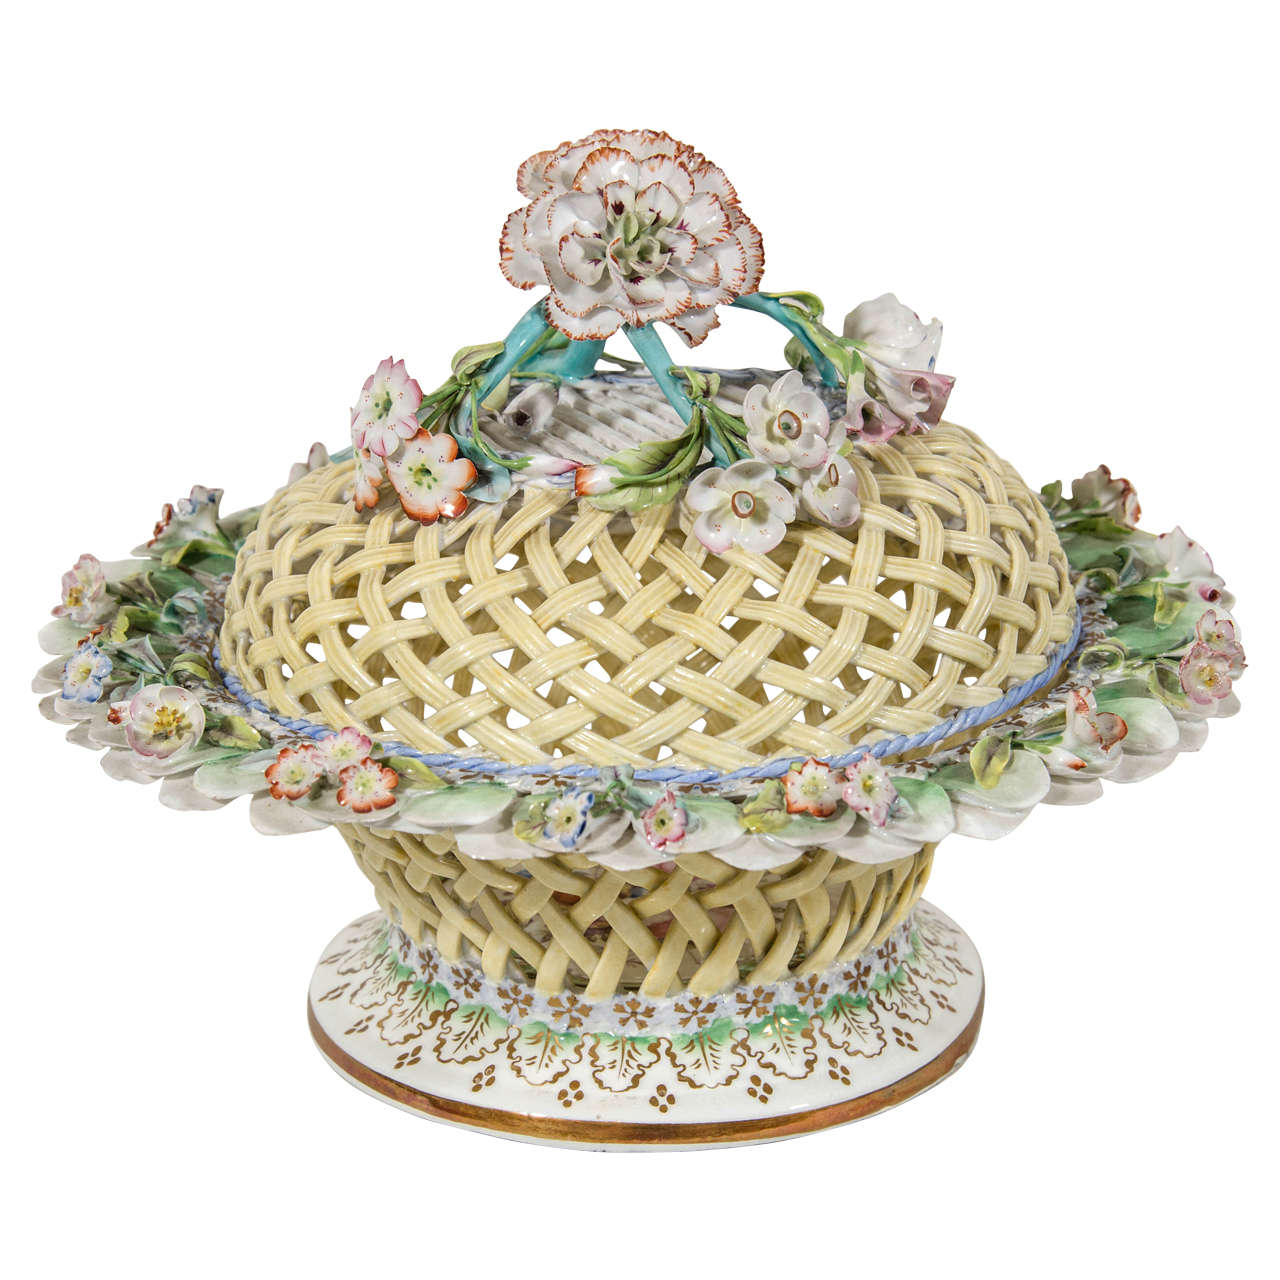 Antique Ridgway Porcelain Basket and Cover